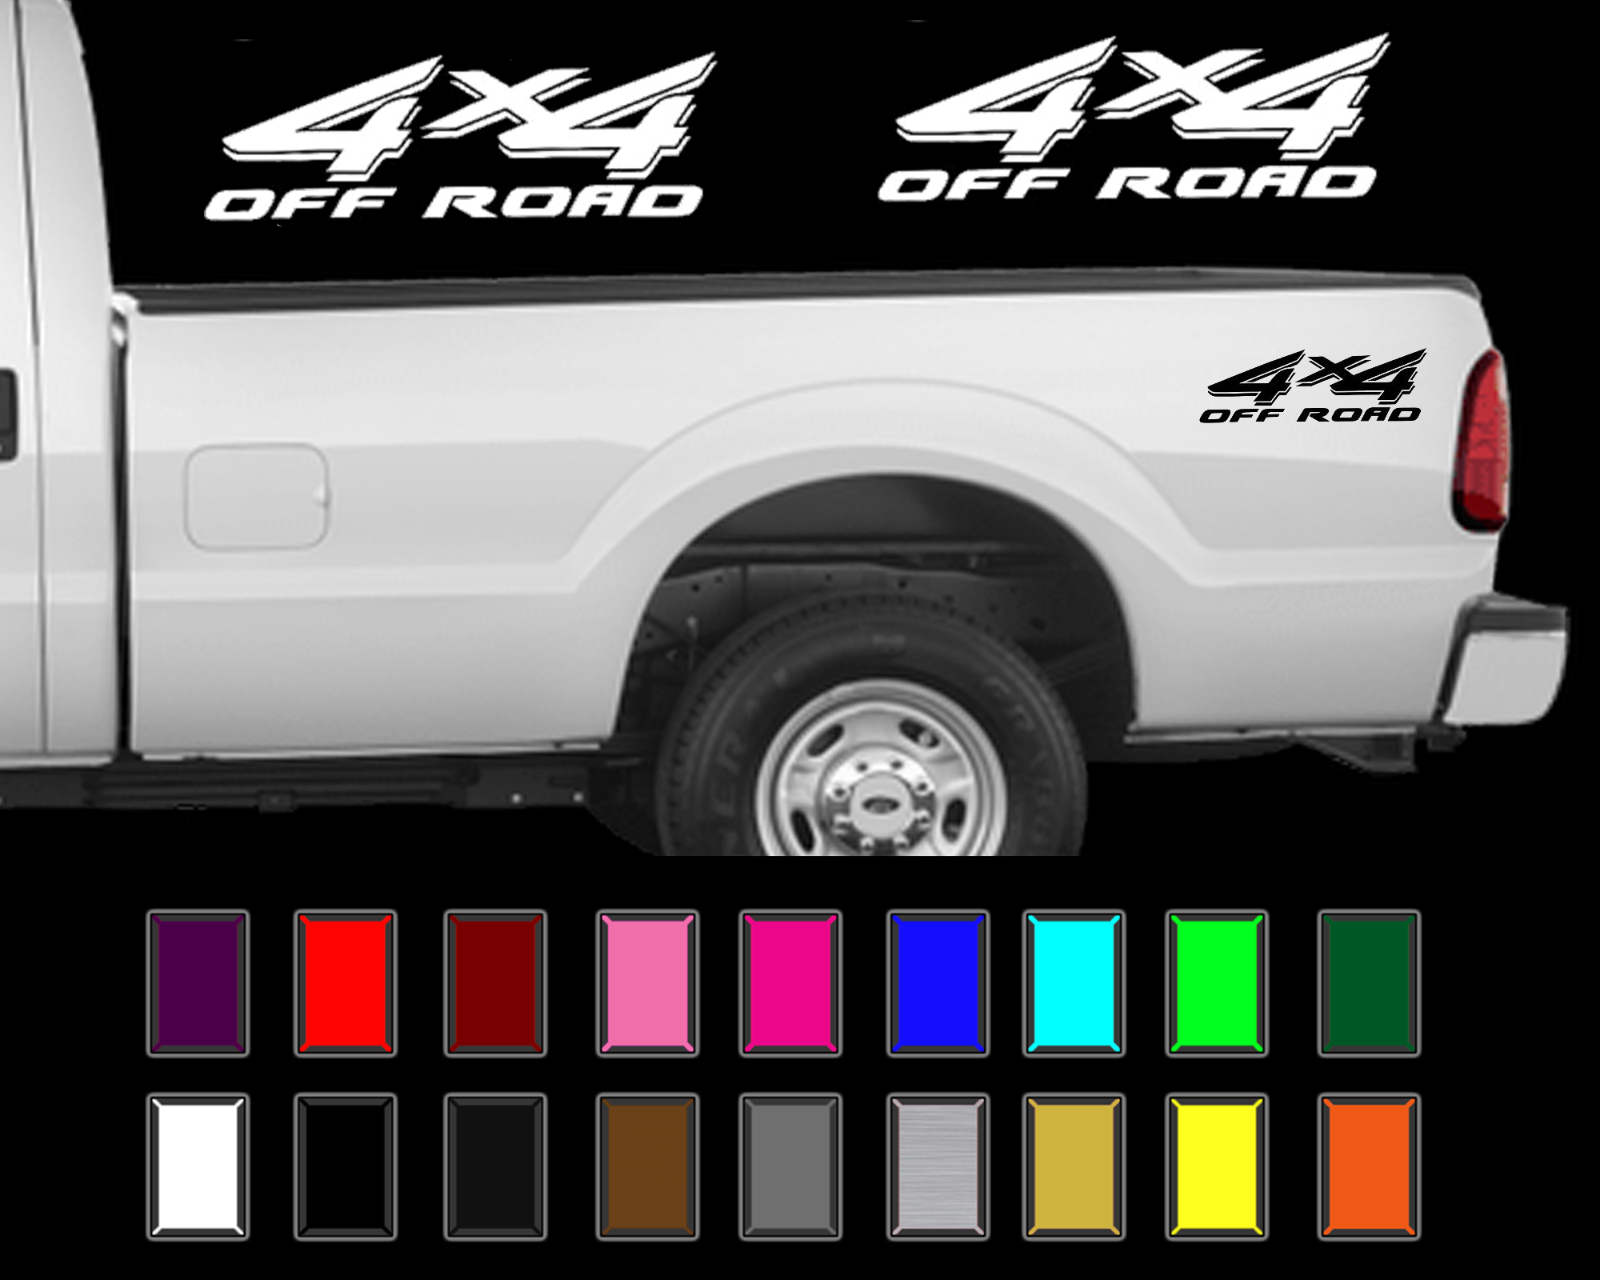 4x4 Off Road Decal Set Fits: Ford F250 Super Duty Truck Bed Side Vinyl Stickers